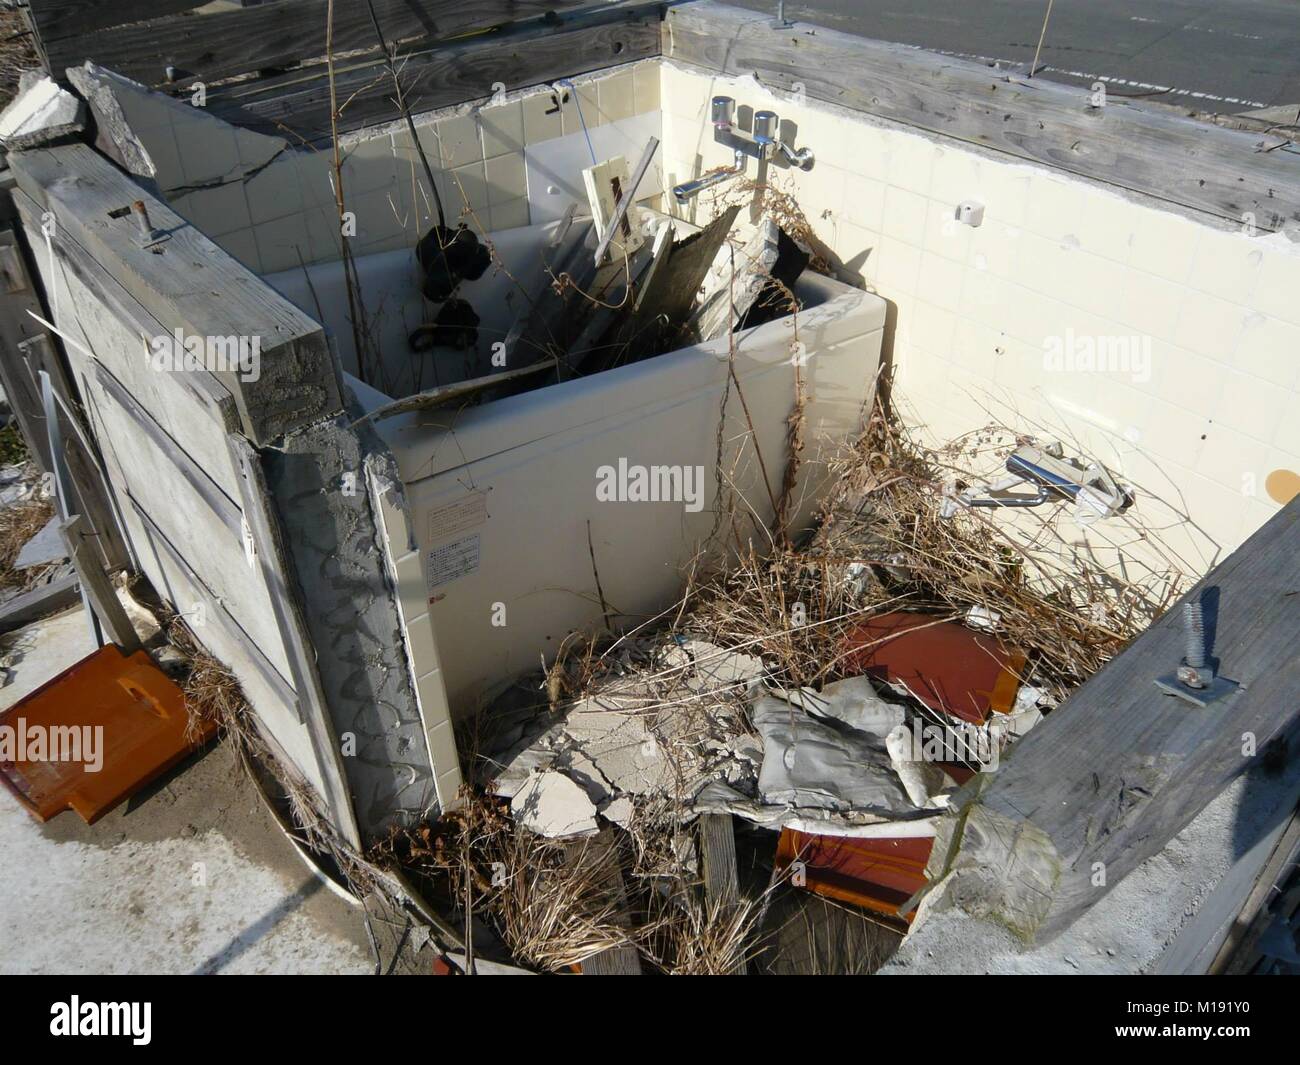 11 March 14 Soma Fukushima Japan Broken House And Its Foundation 3 Years After Tohoku Earthquak Tsunami Disaster 11 Isobe District Was One Of The Most Damaged Area In Soma City Fukushima Stock Photo Alamy